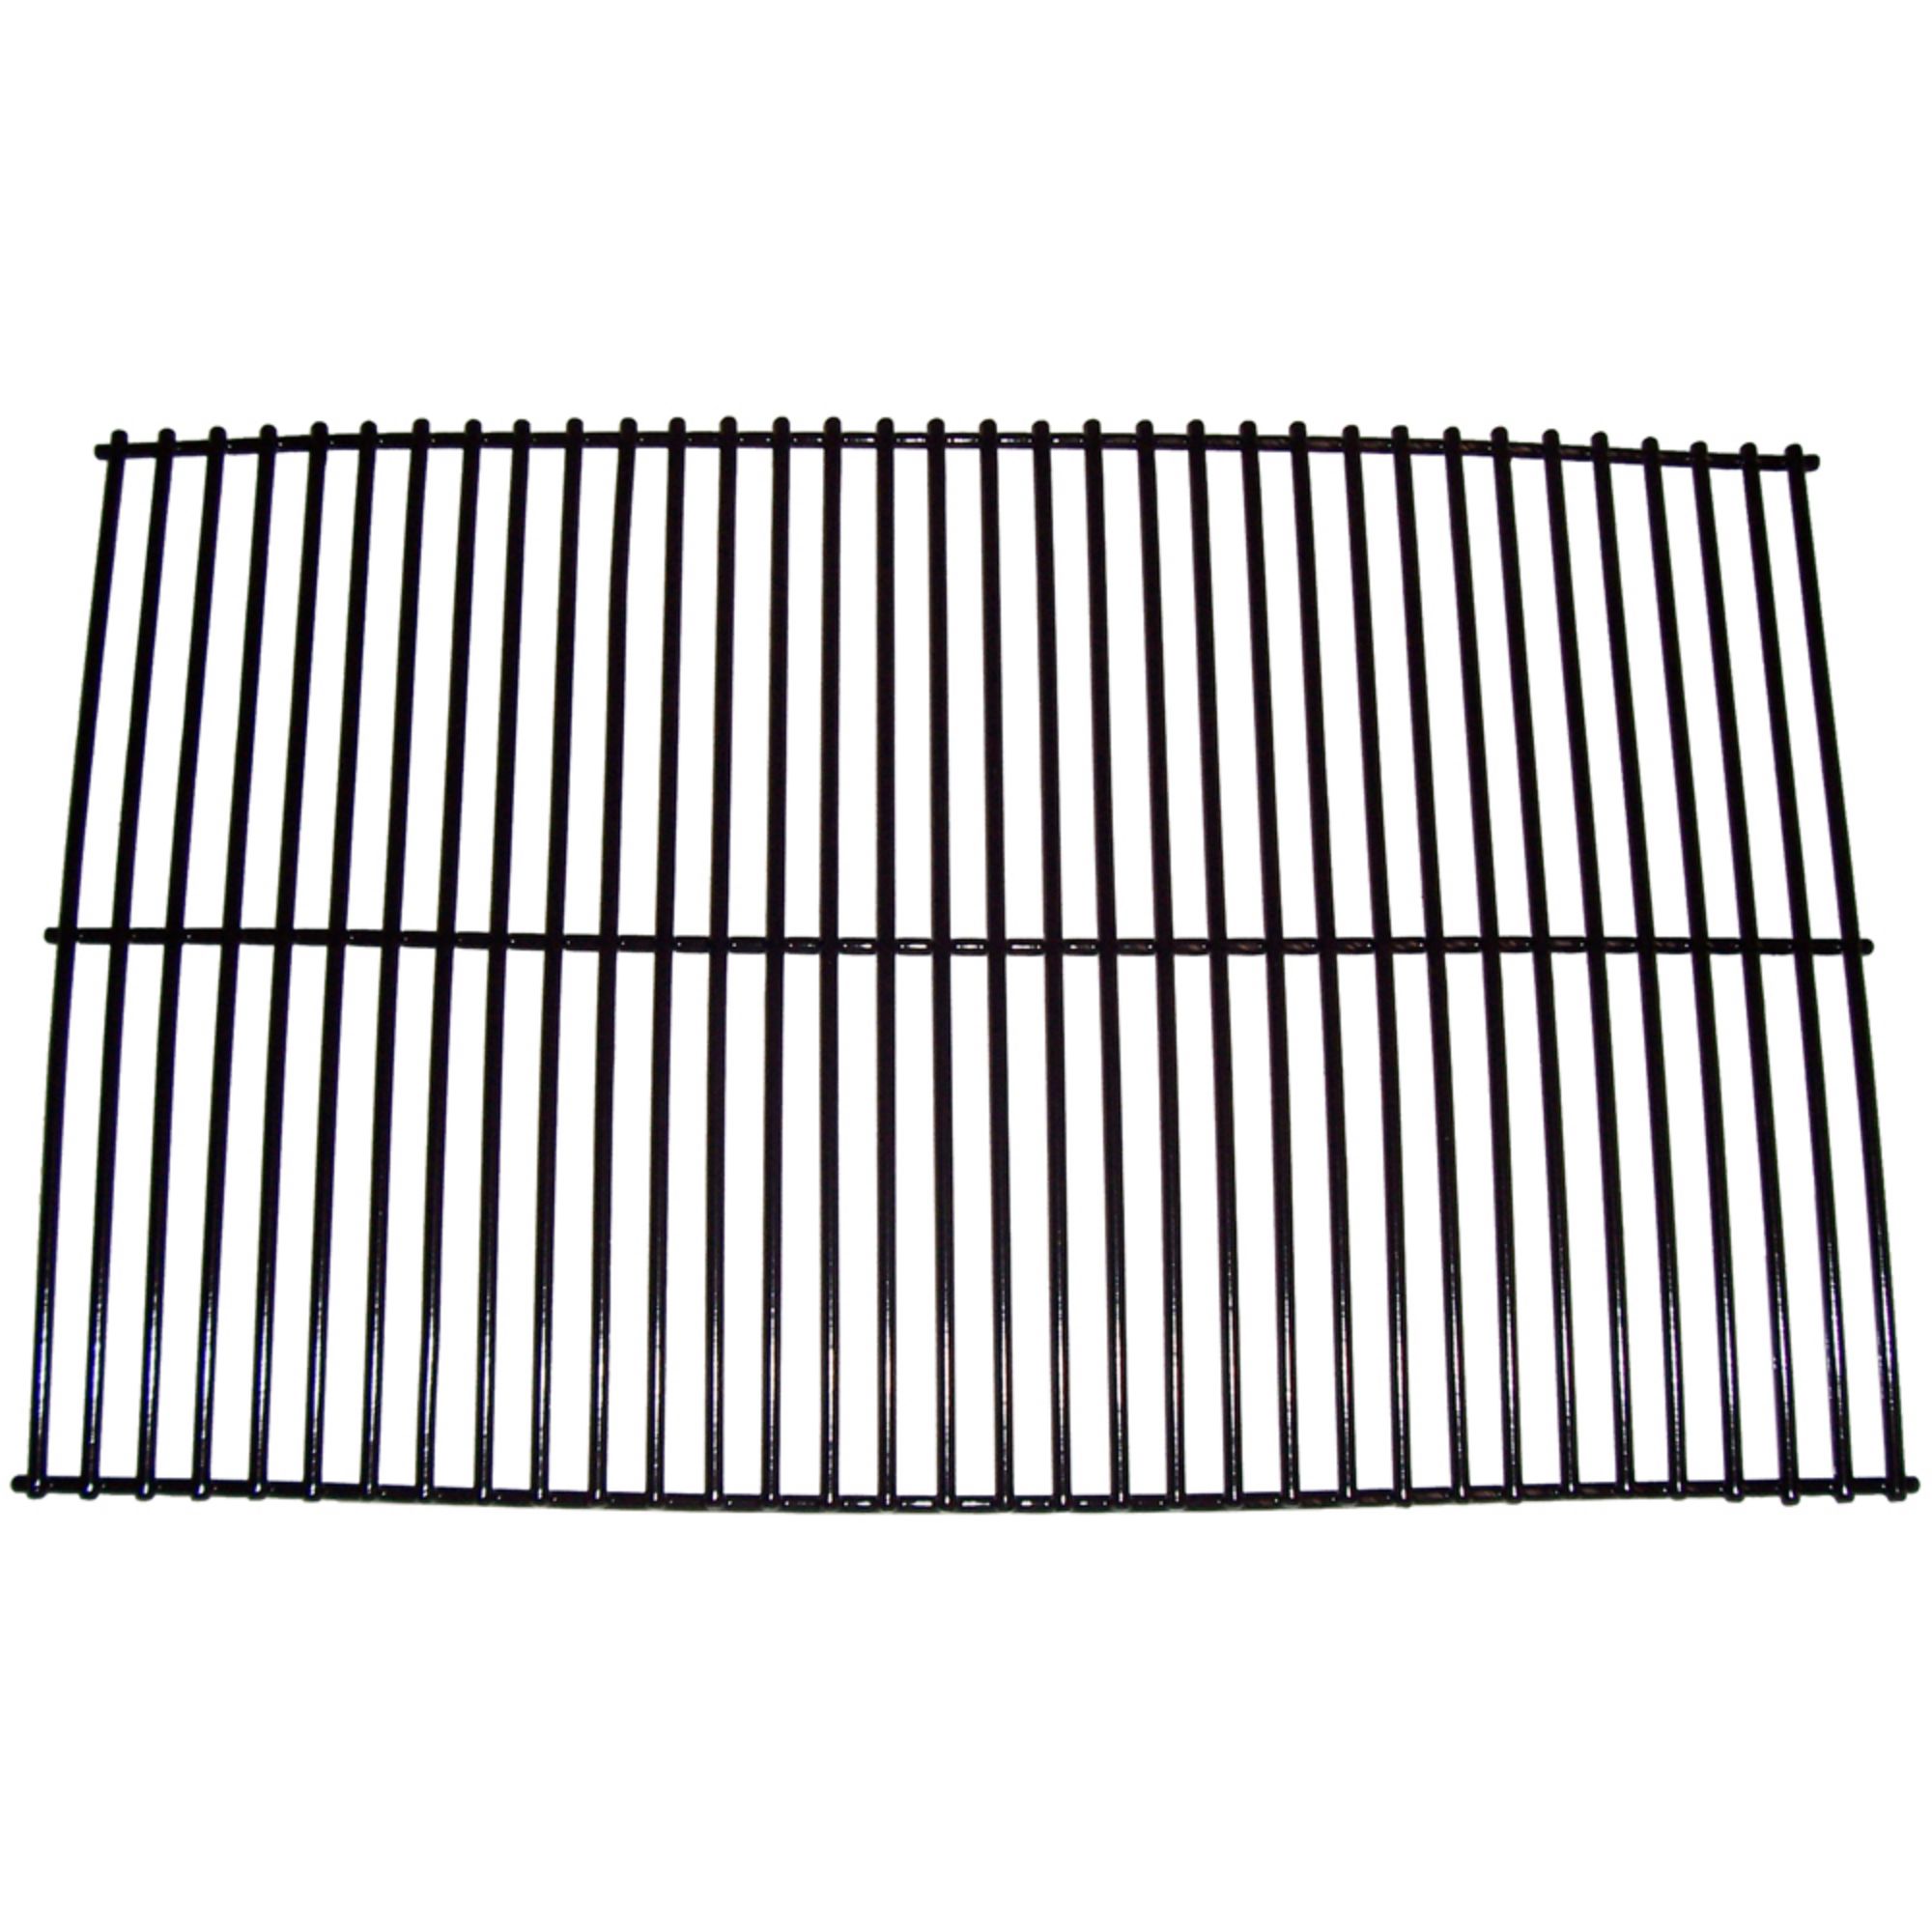 Porcelain Steel Wire Cooking Grid for Arkla, Charmglow, Coleman, Grill Master, Sunbeam Brand Gas Grills